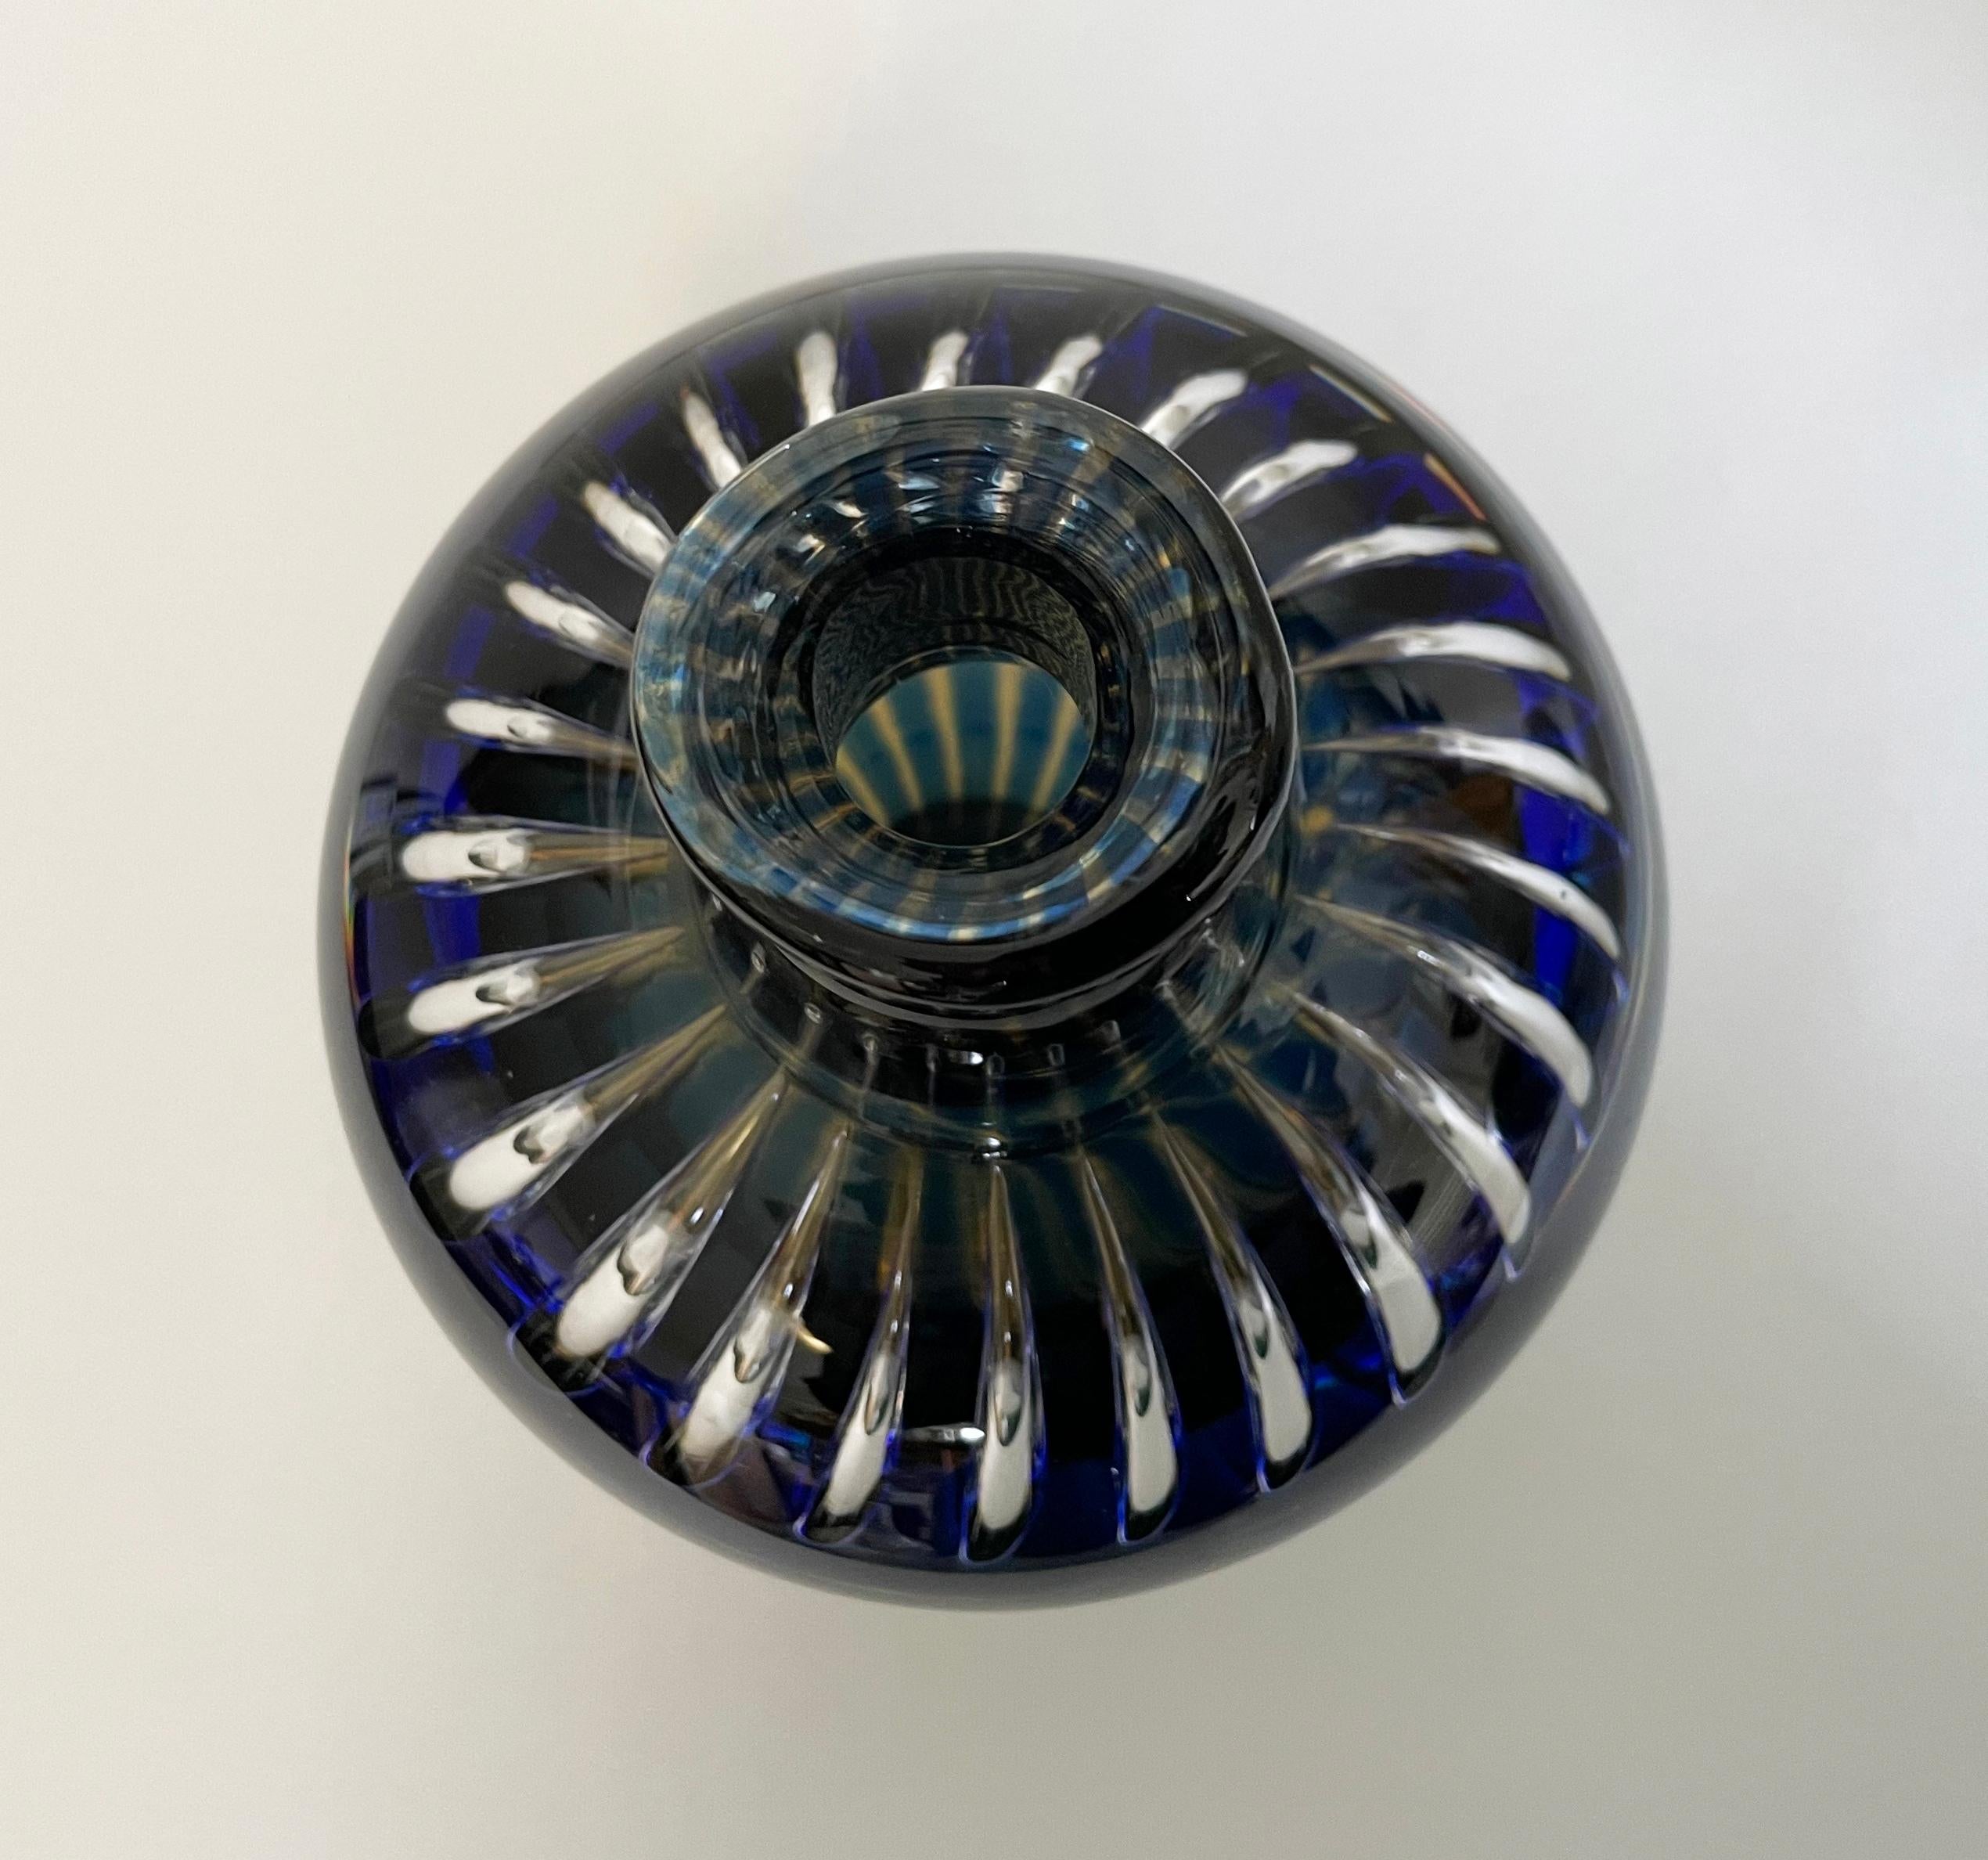 Swedish Orrefors Ariel Vase By Edvin Ohrstrom, Circa 1950 For Sale